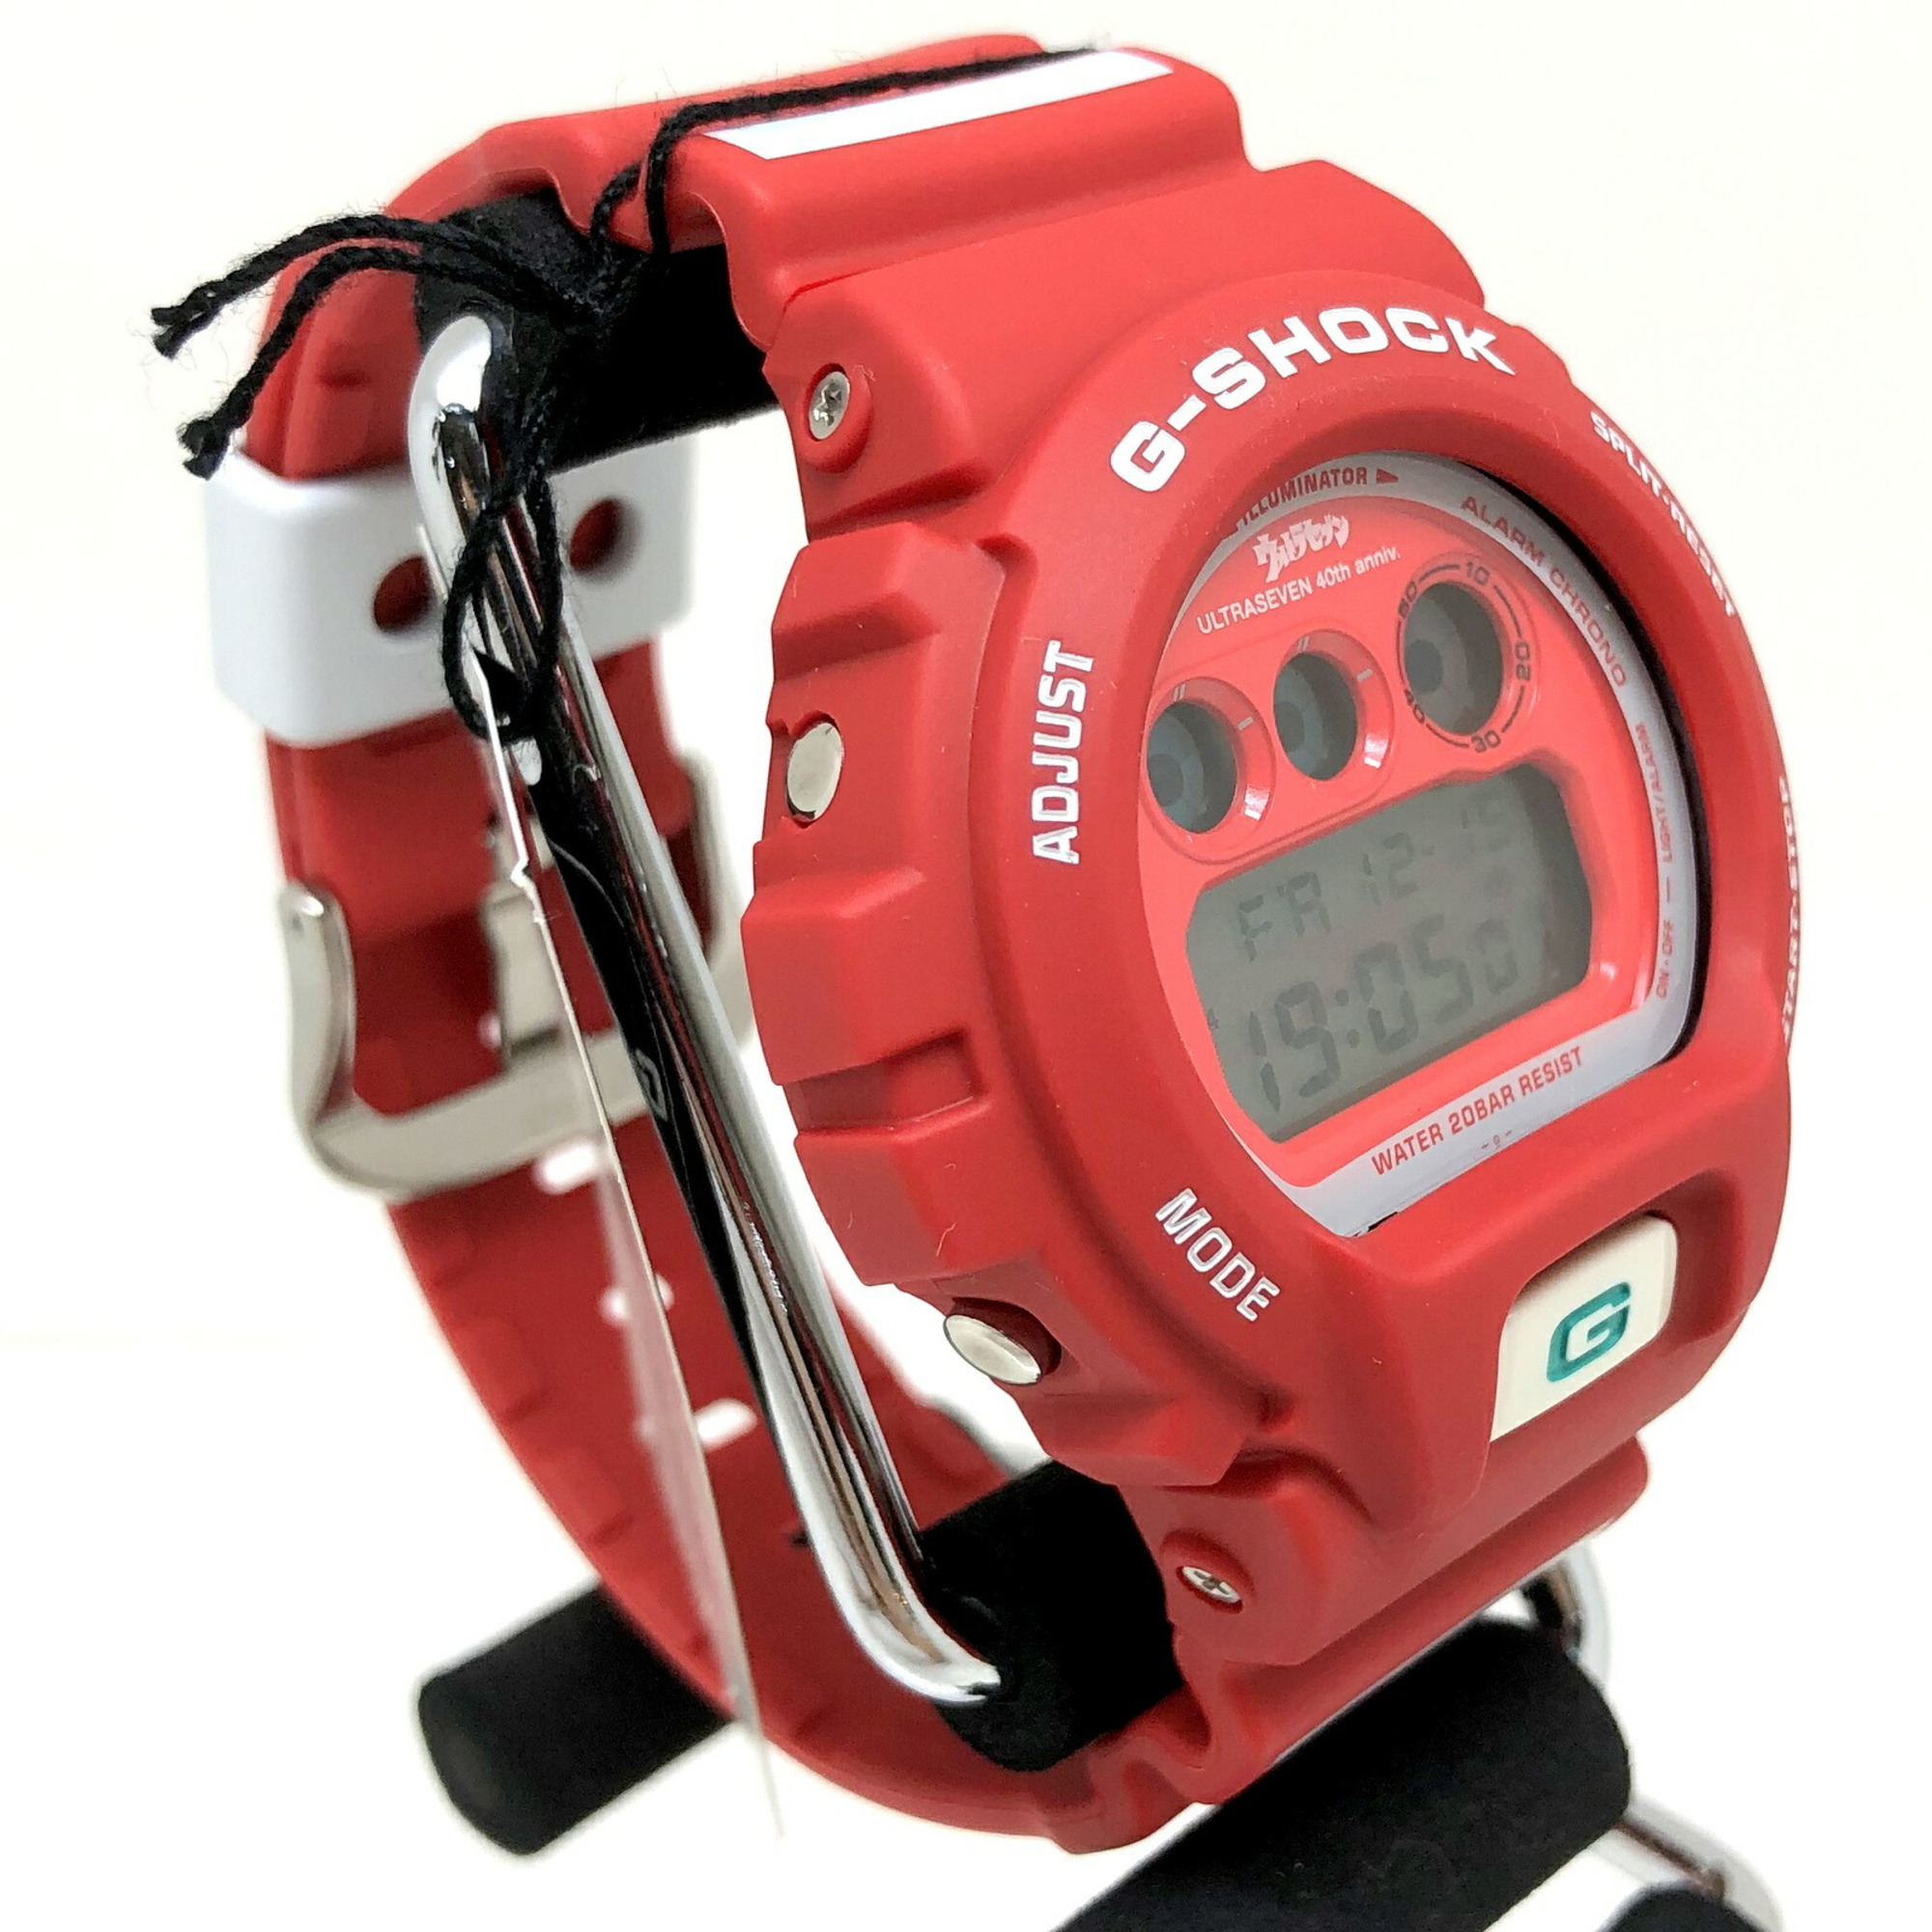 CASIO Casio G-SHOCK Watch DW-6900BUL7-9JF Ultra Seven 40th Anniversary ULTRASEVEN KUBRICK SPECIAL EDITION Men's Three Eyes Red with Kubrick ITT0CECO9ROW